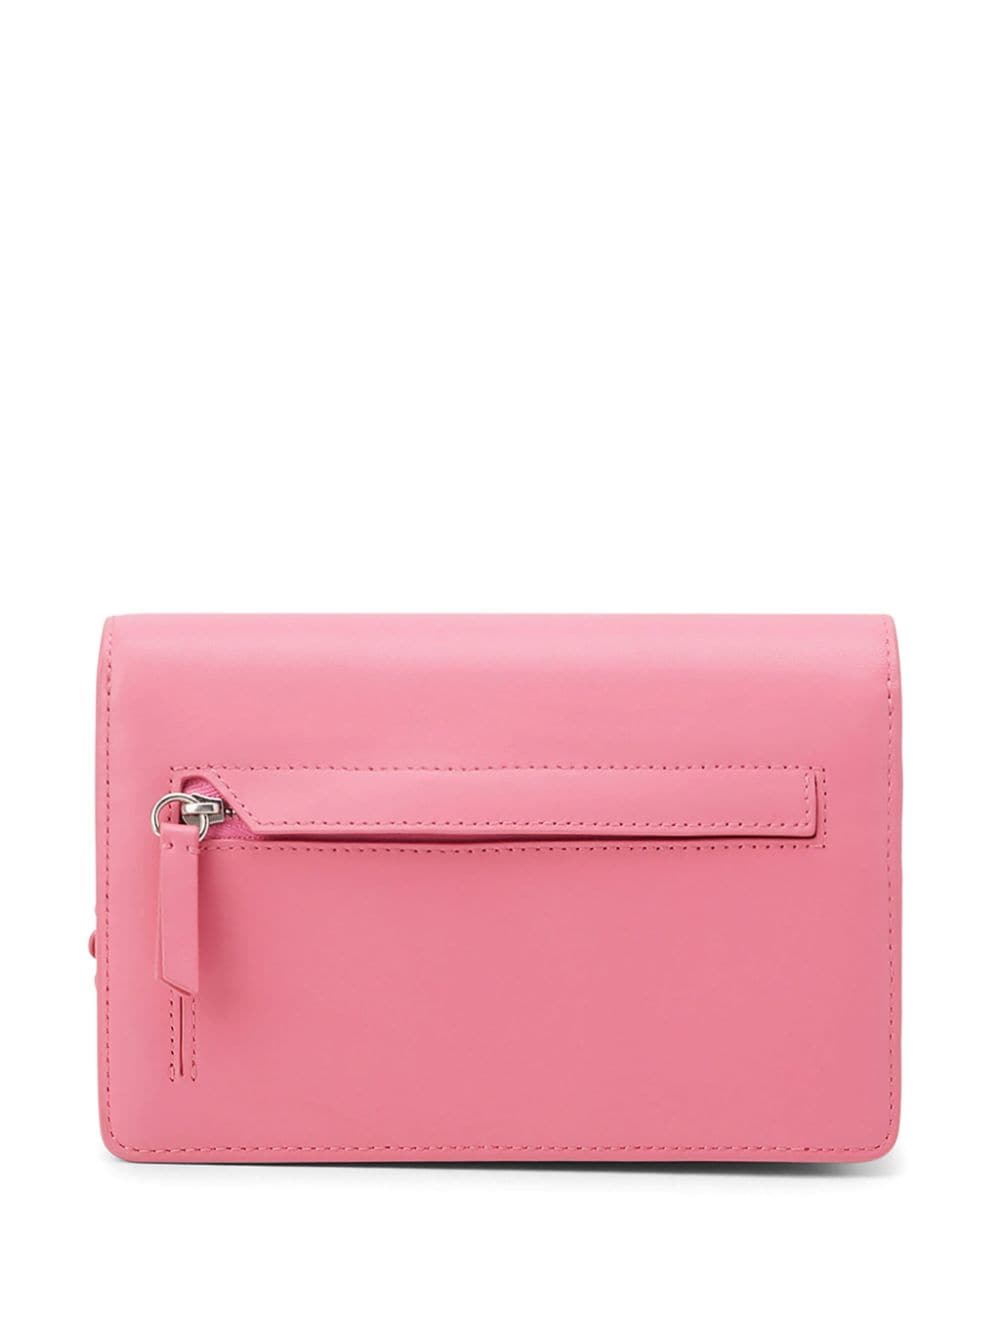 Mulberry small Darley leather crossbody bag - Roze